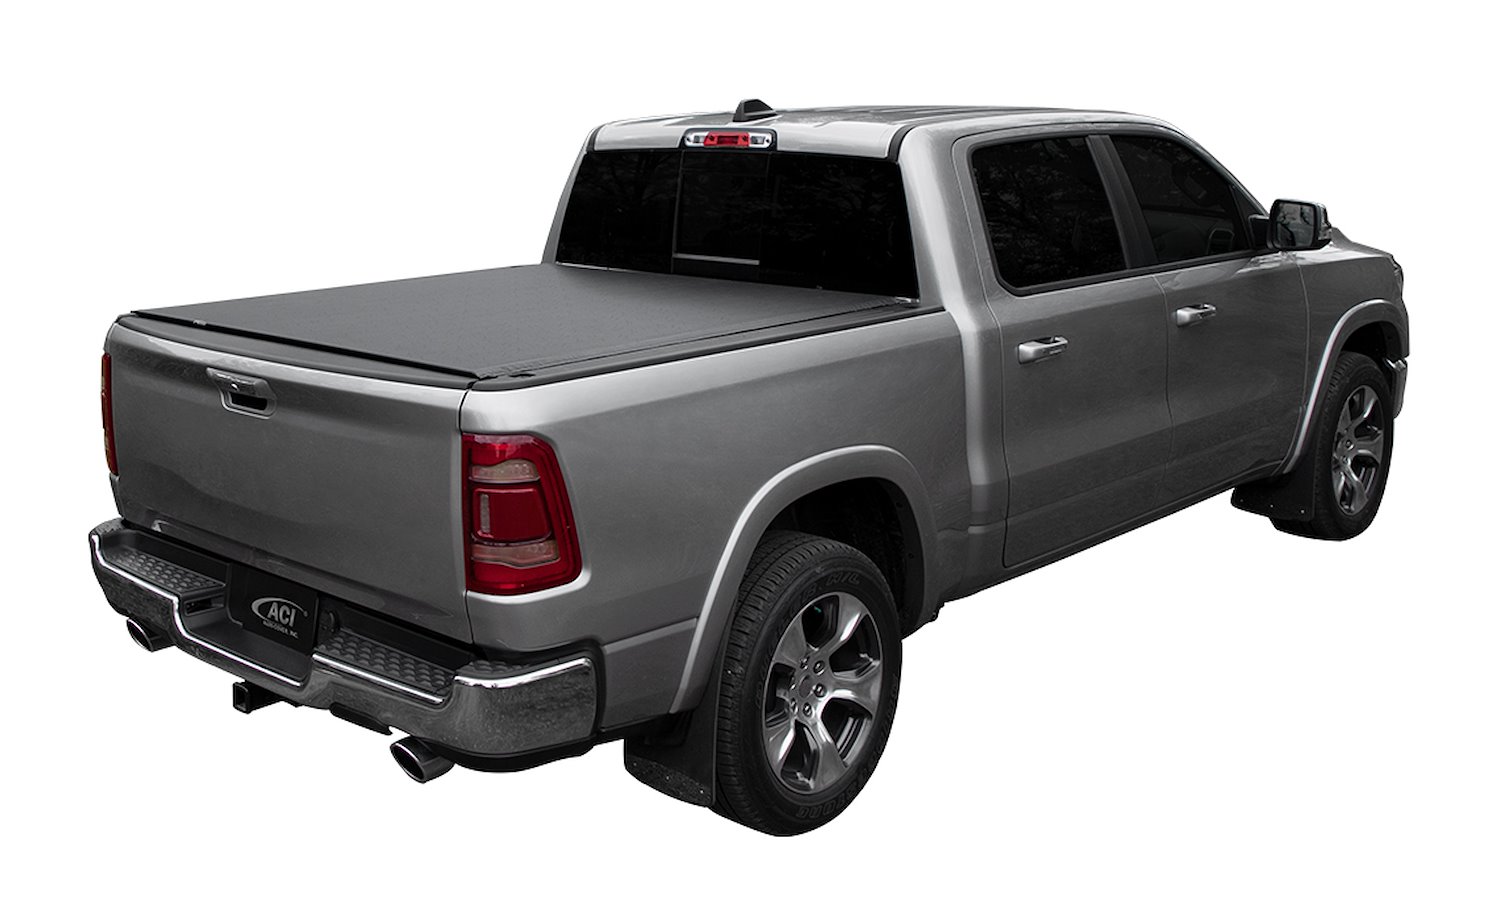 VANISH Roll-Up Tonneau Cover, Fits Select Ram 1500, with 5 ft. 7 in. Bed